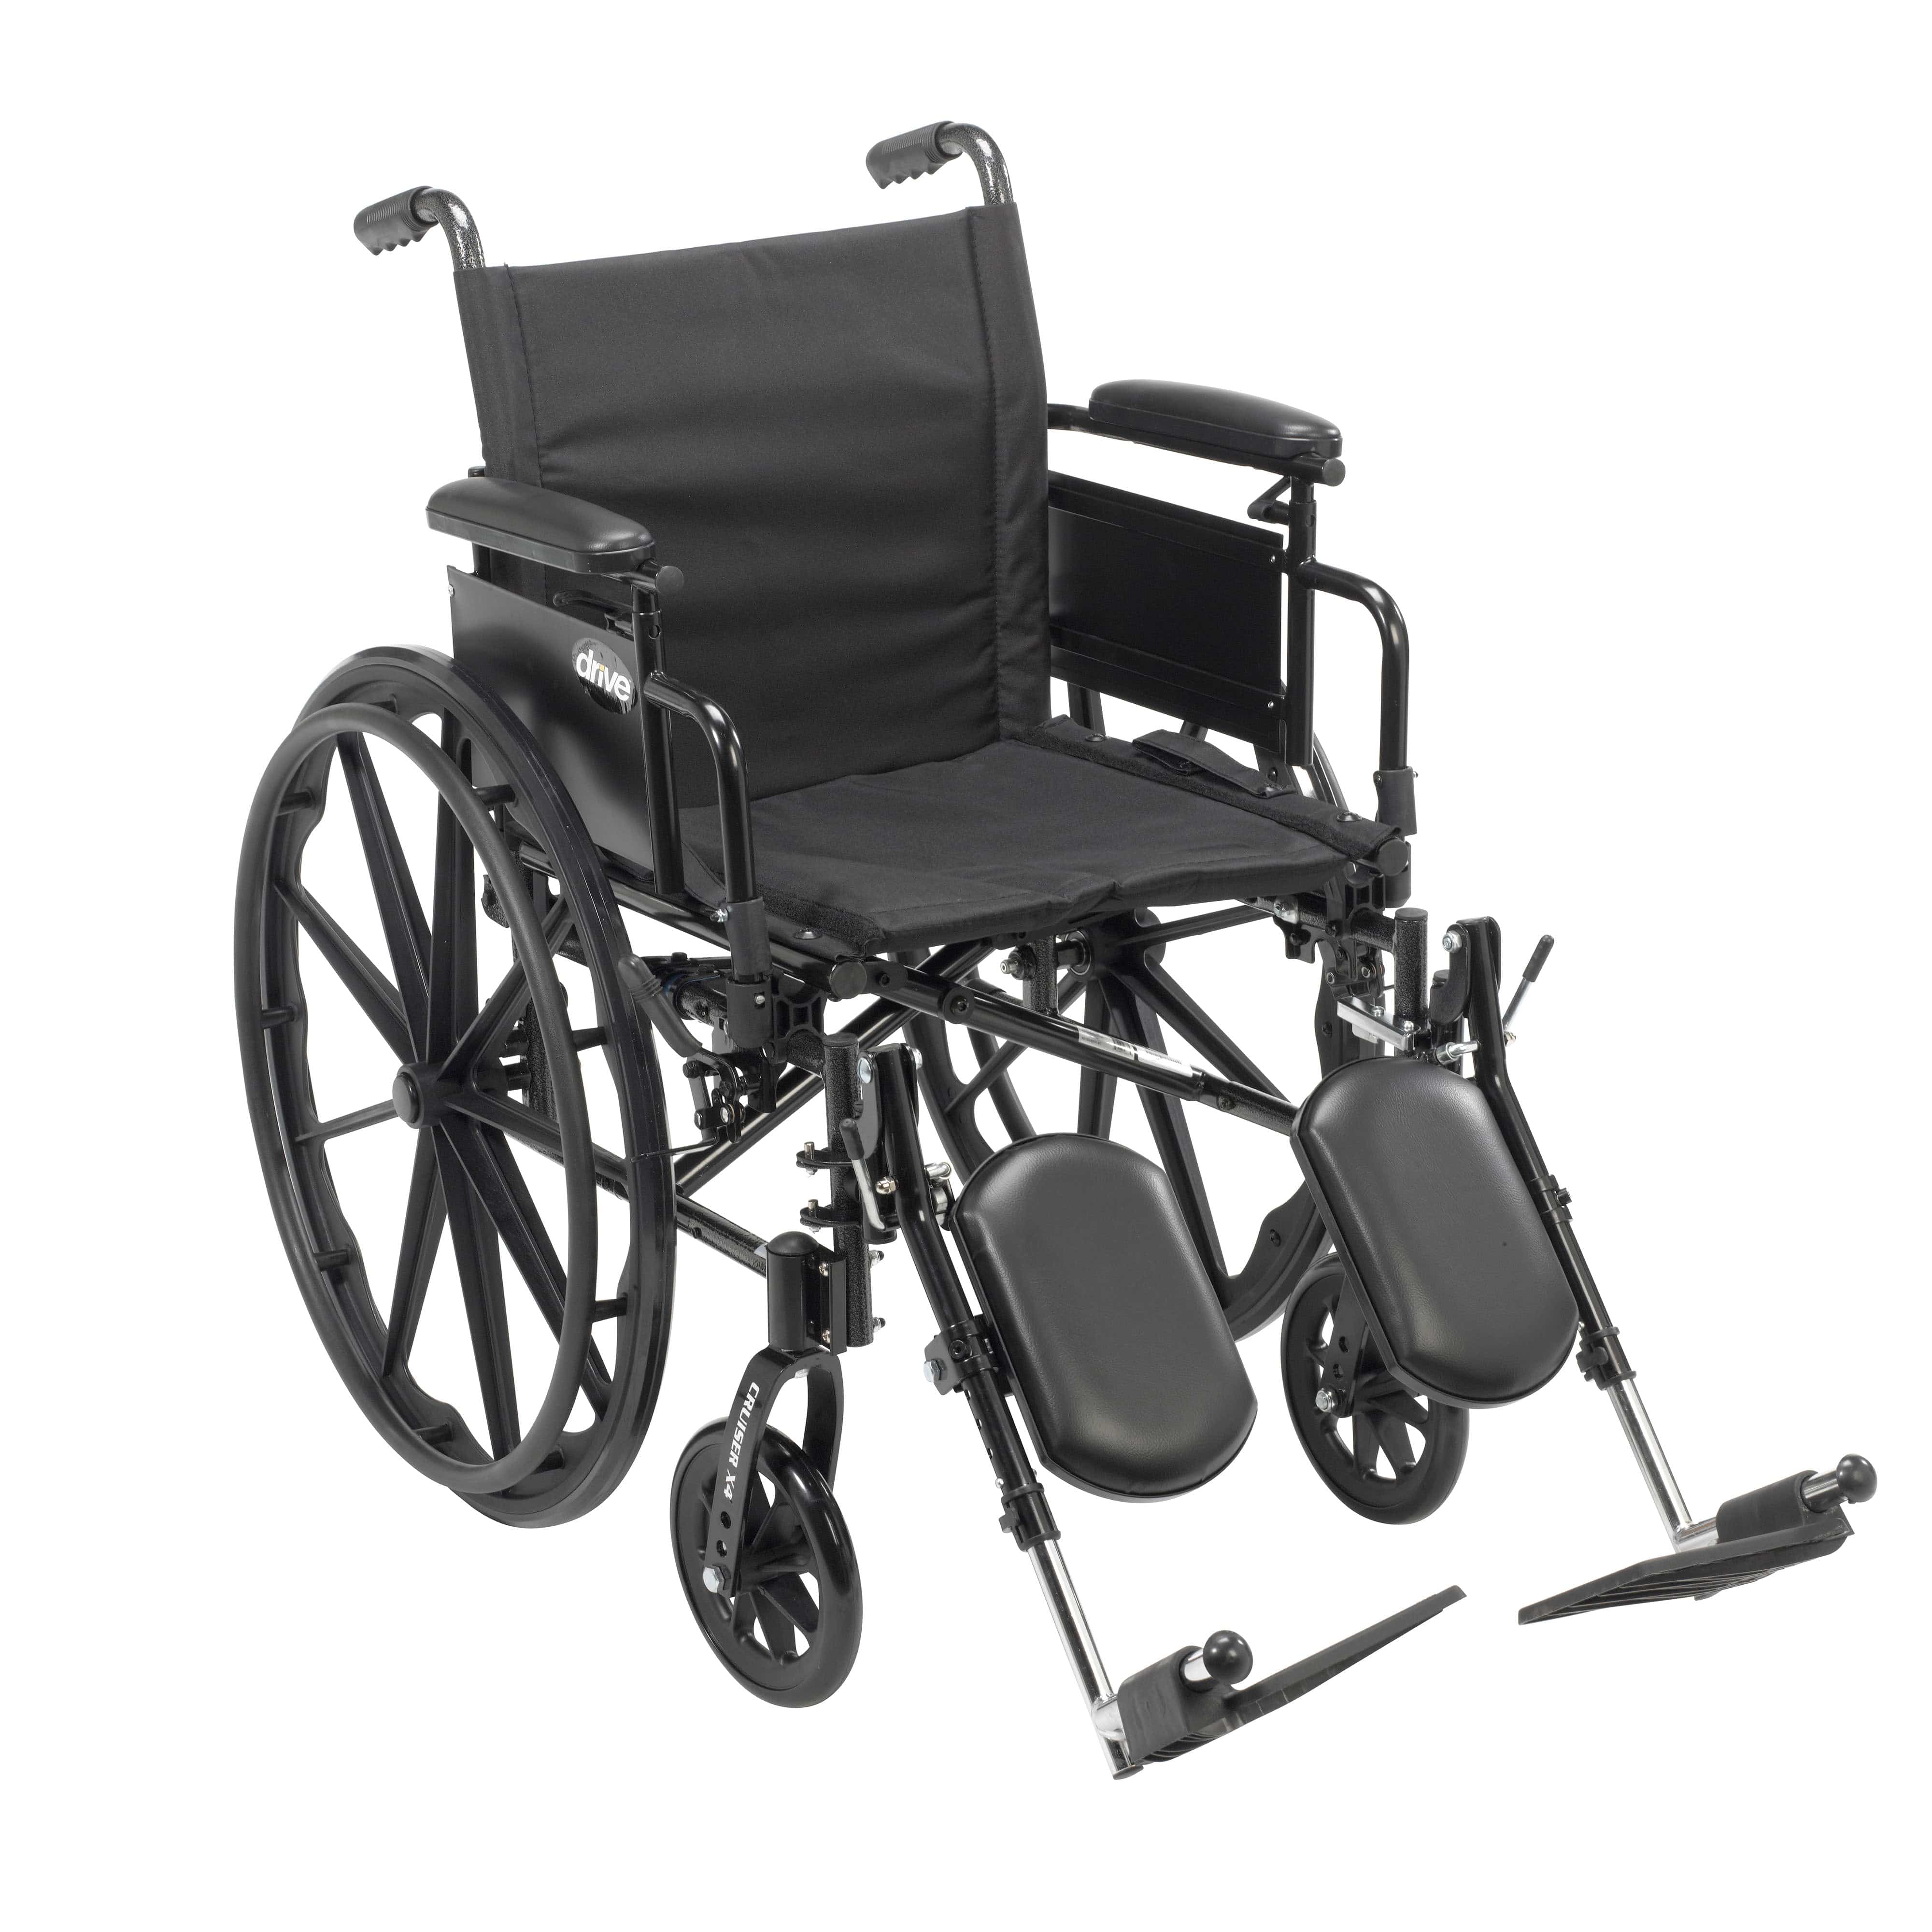 Drive Medical Wheelchairs/Lightweight Wheelchairs Desk Arms / Elevating Leg Rests / 20" Seat Drive Medical Cruiser X4 Lightweight Dual Axle Wheelchair with Adjustable Detatchable Arms